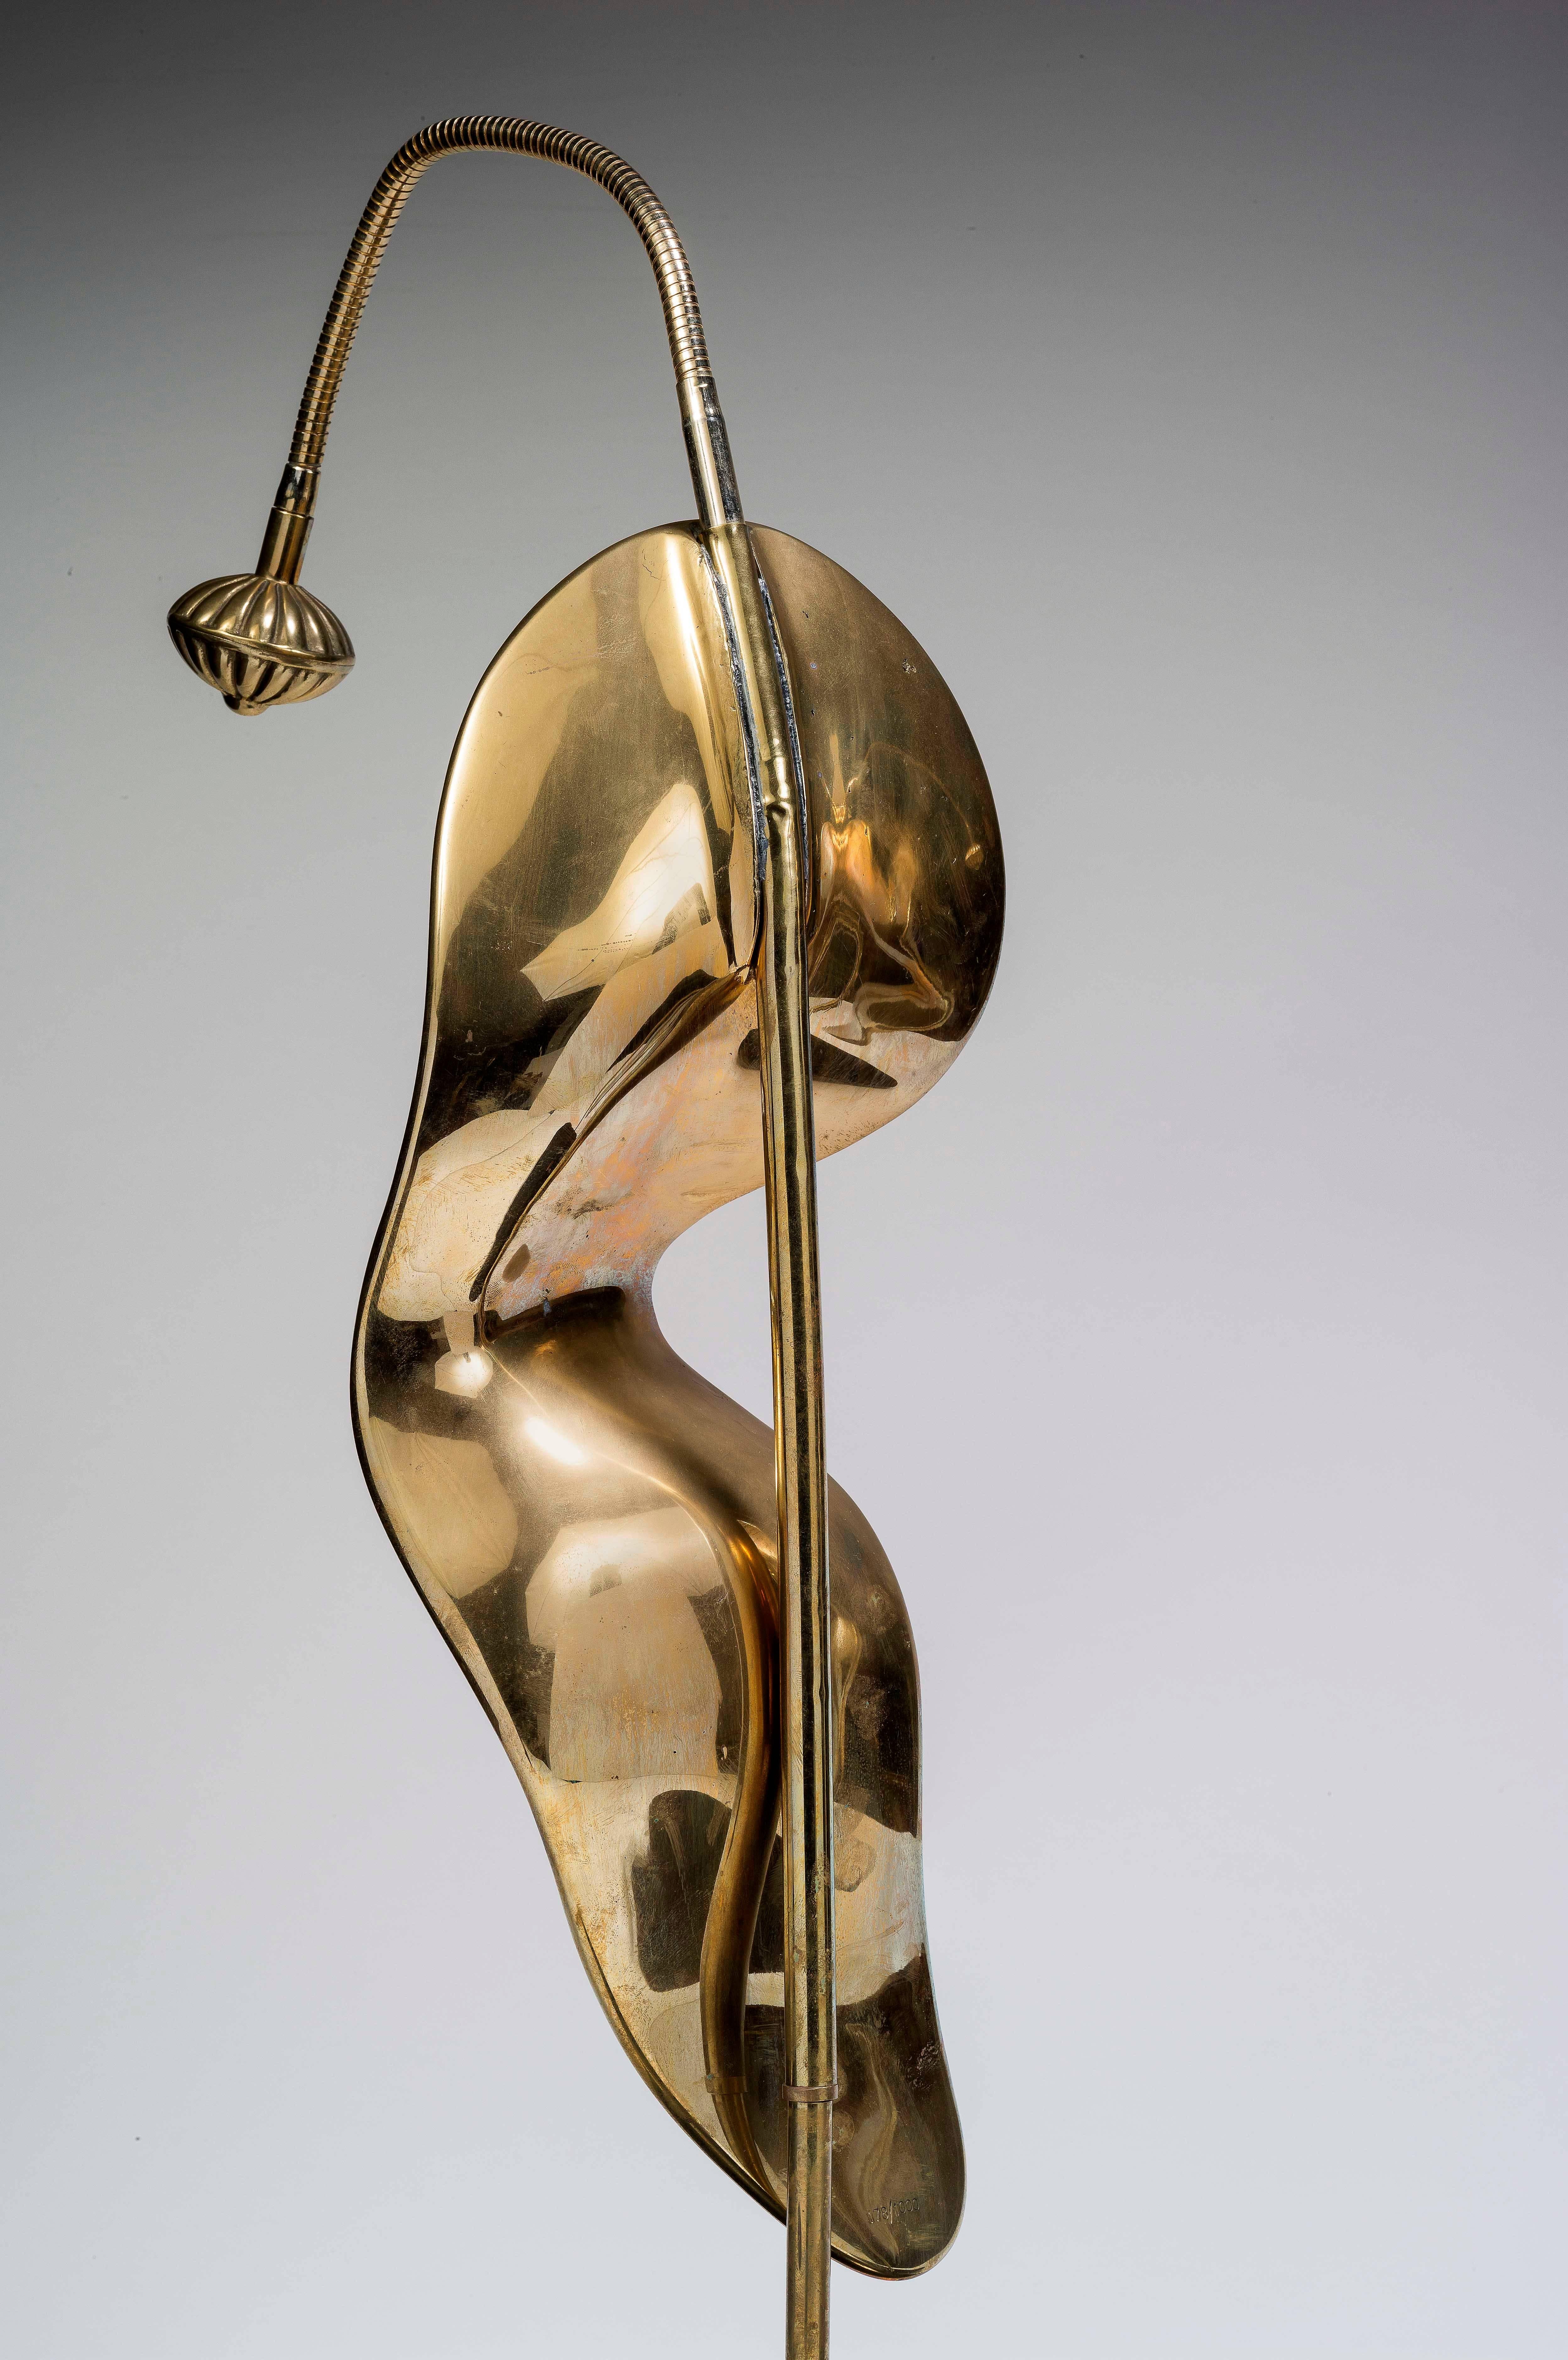 2 Montres Molles (Two The Soft Watches) - Gold Figurative Sculpture by Salvador Dalí